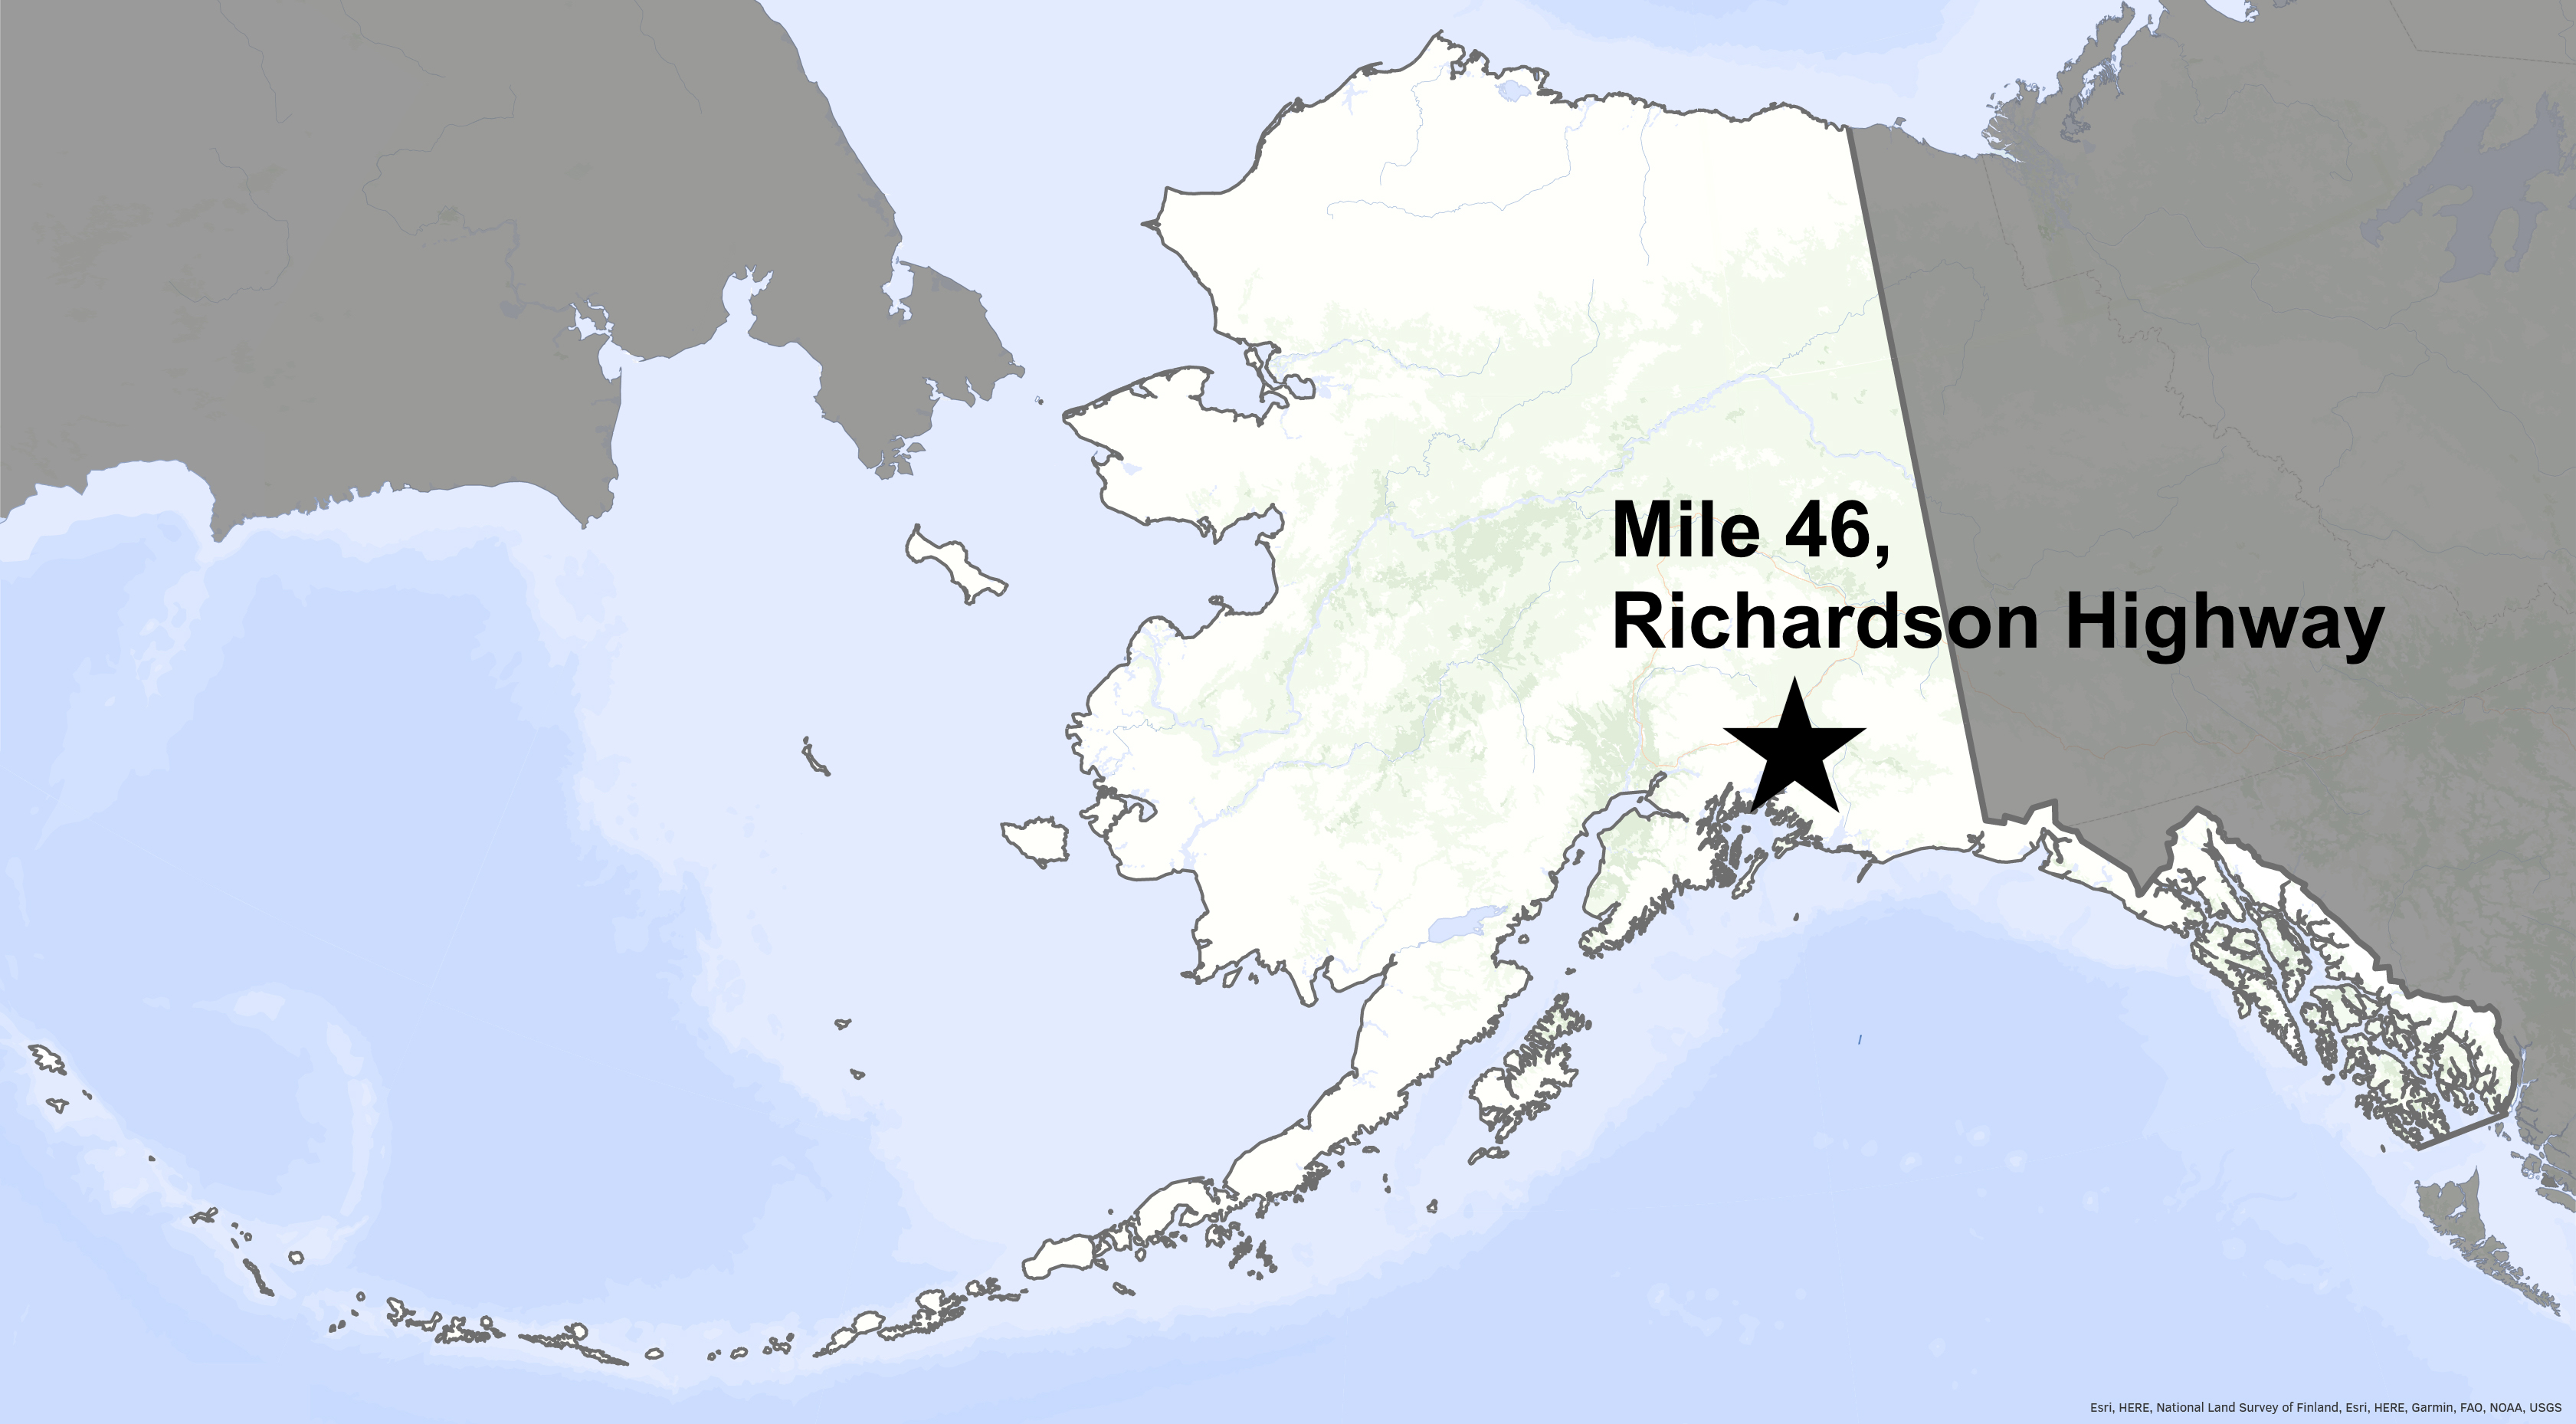 A map of Alaska with a star in the lower southeast corner to mark mile 46 of the Richardson Highway